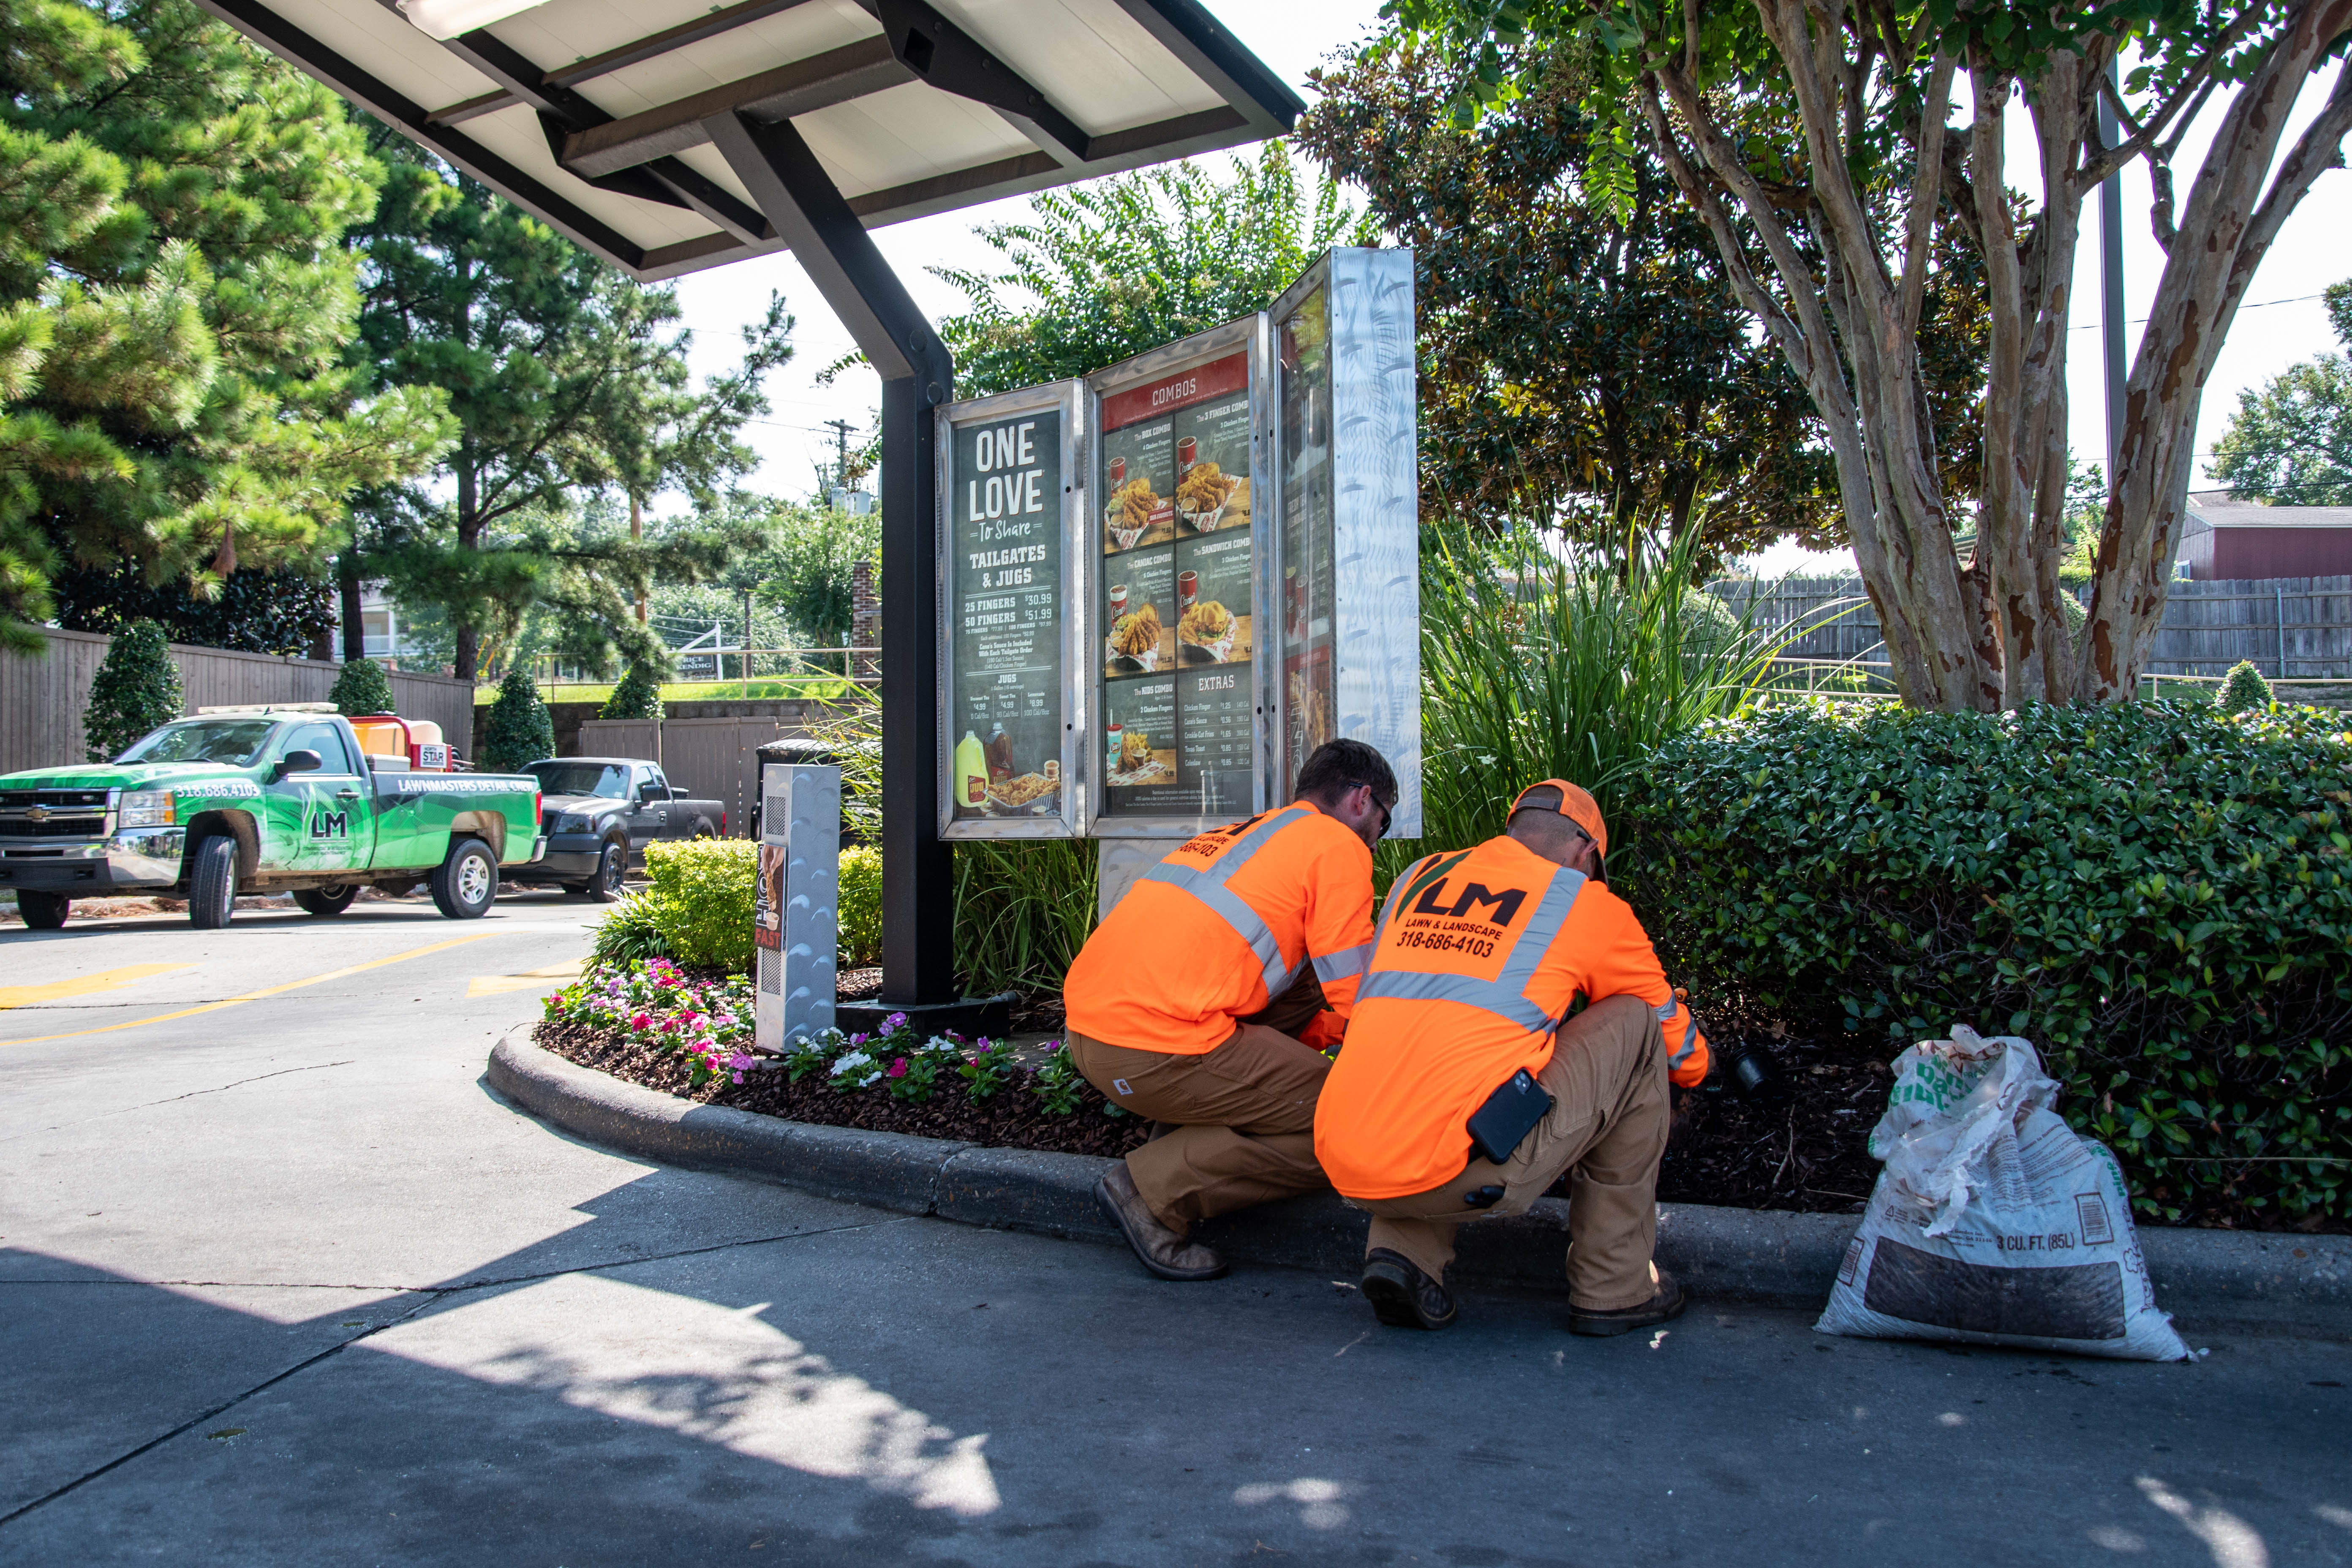 Lawnmasters team doing lawn care in front of restaurant